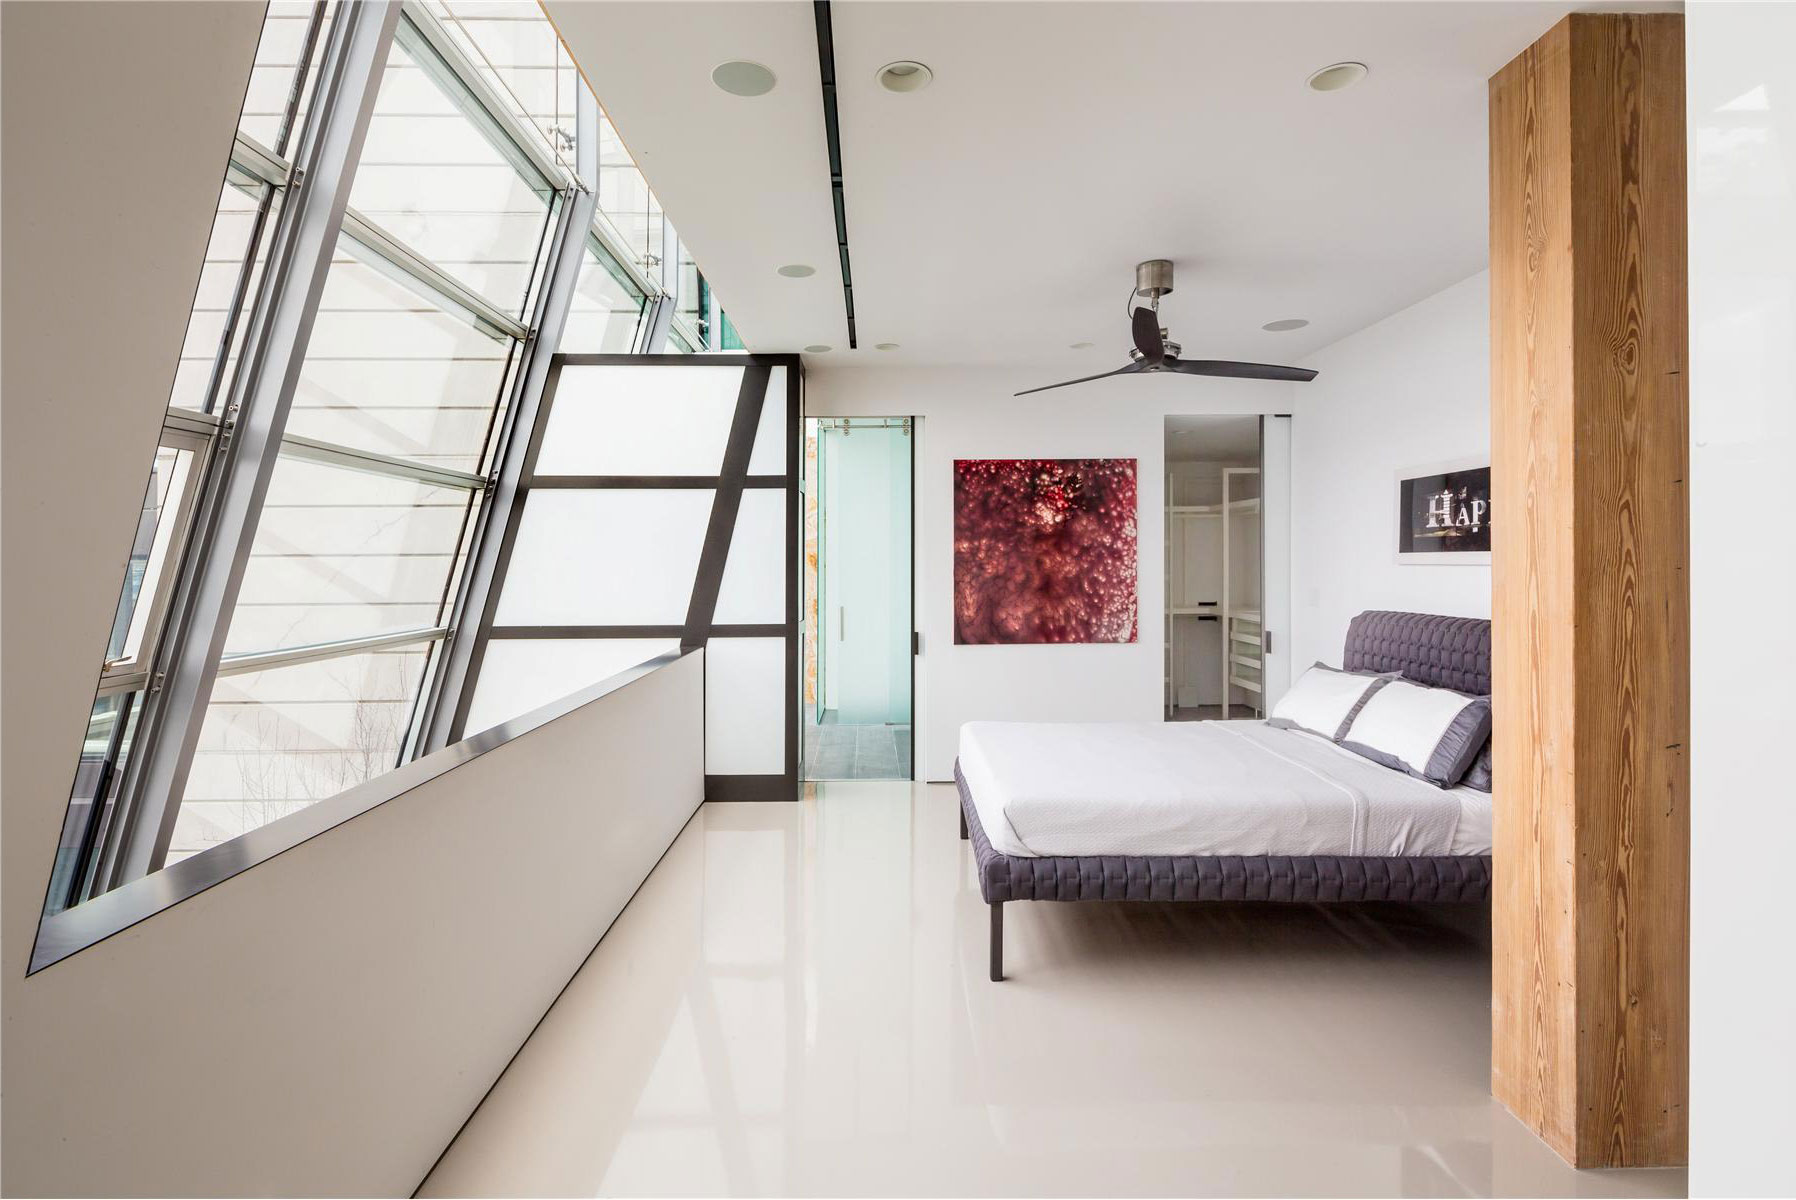 Profile Bed Mural Low Profile Bed Artistic Wall Mural Laminate Flooring Sloping Glass Wall In Metallic Frame Greenwich Street Project Architecture Stunning Steel And Glass Structure Reflected In 497 Greenwich Street Penthouse